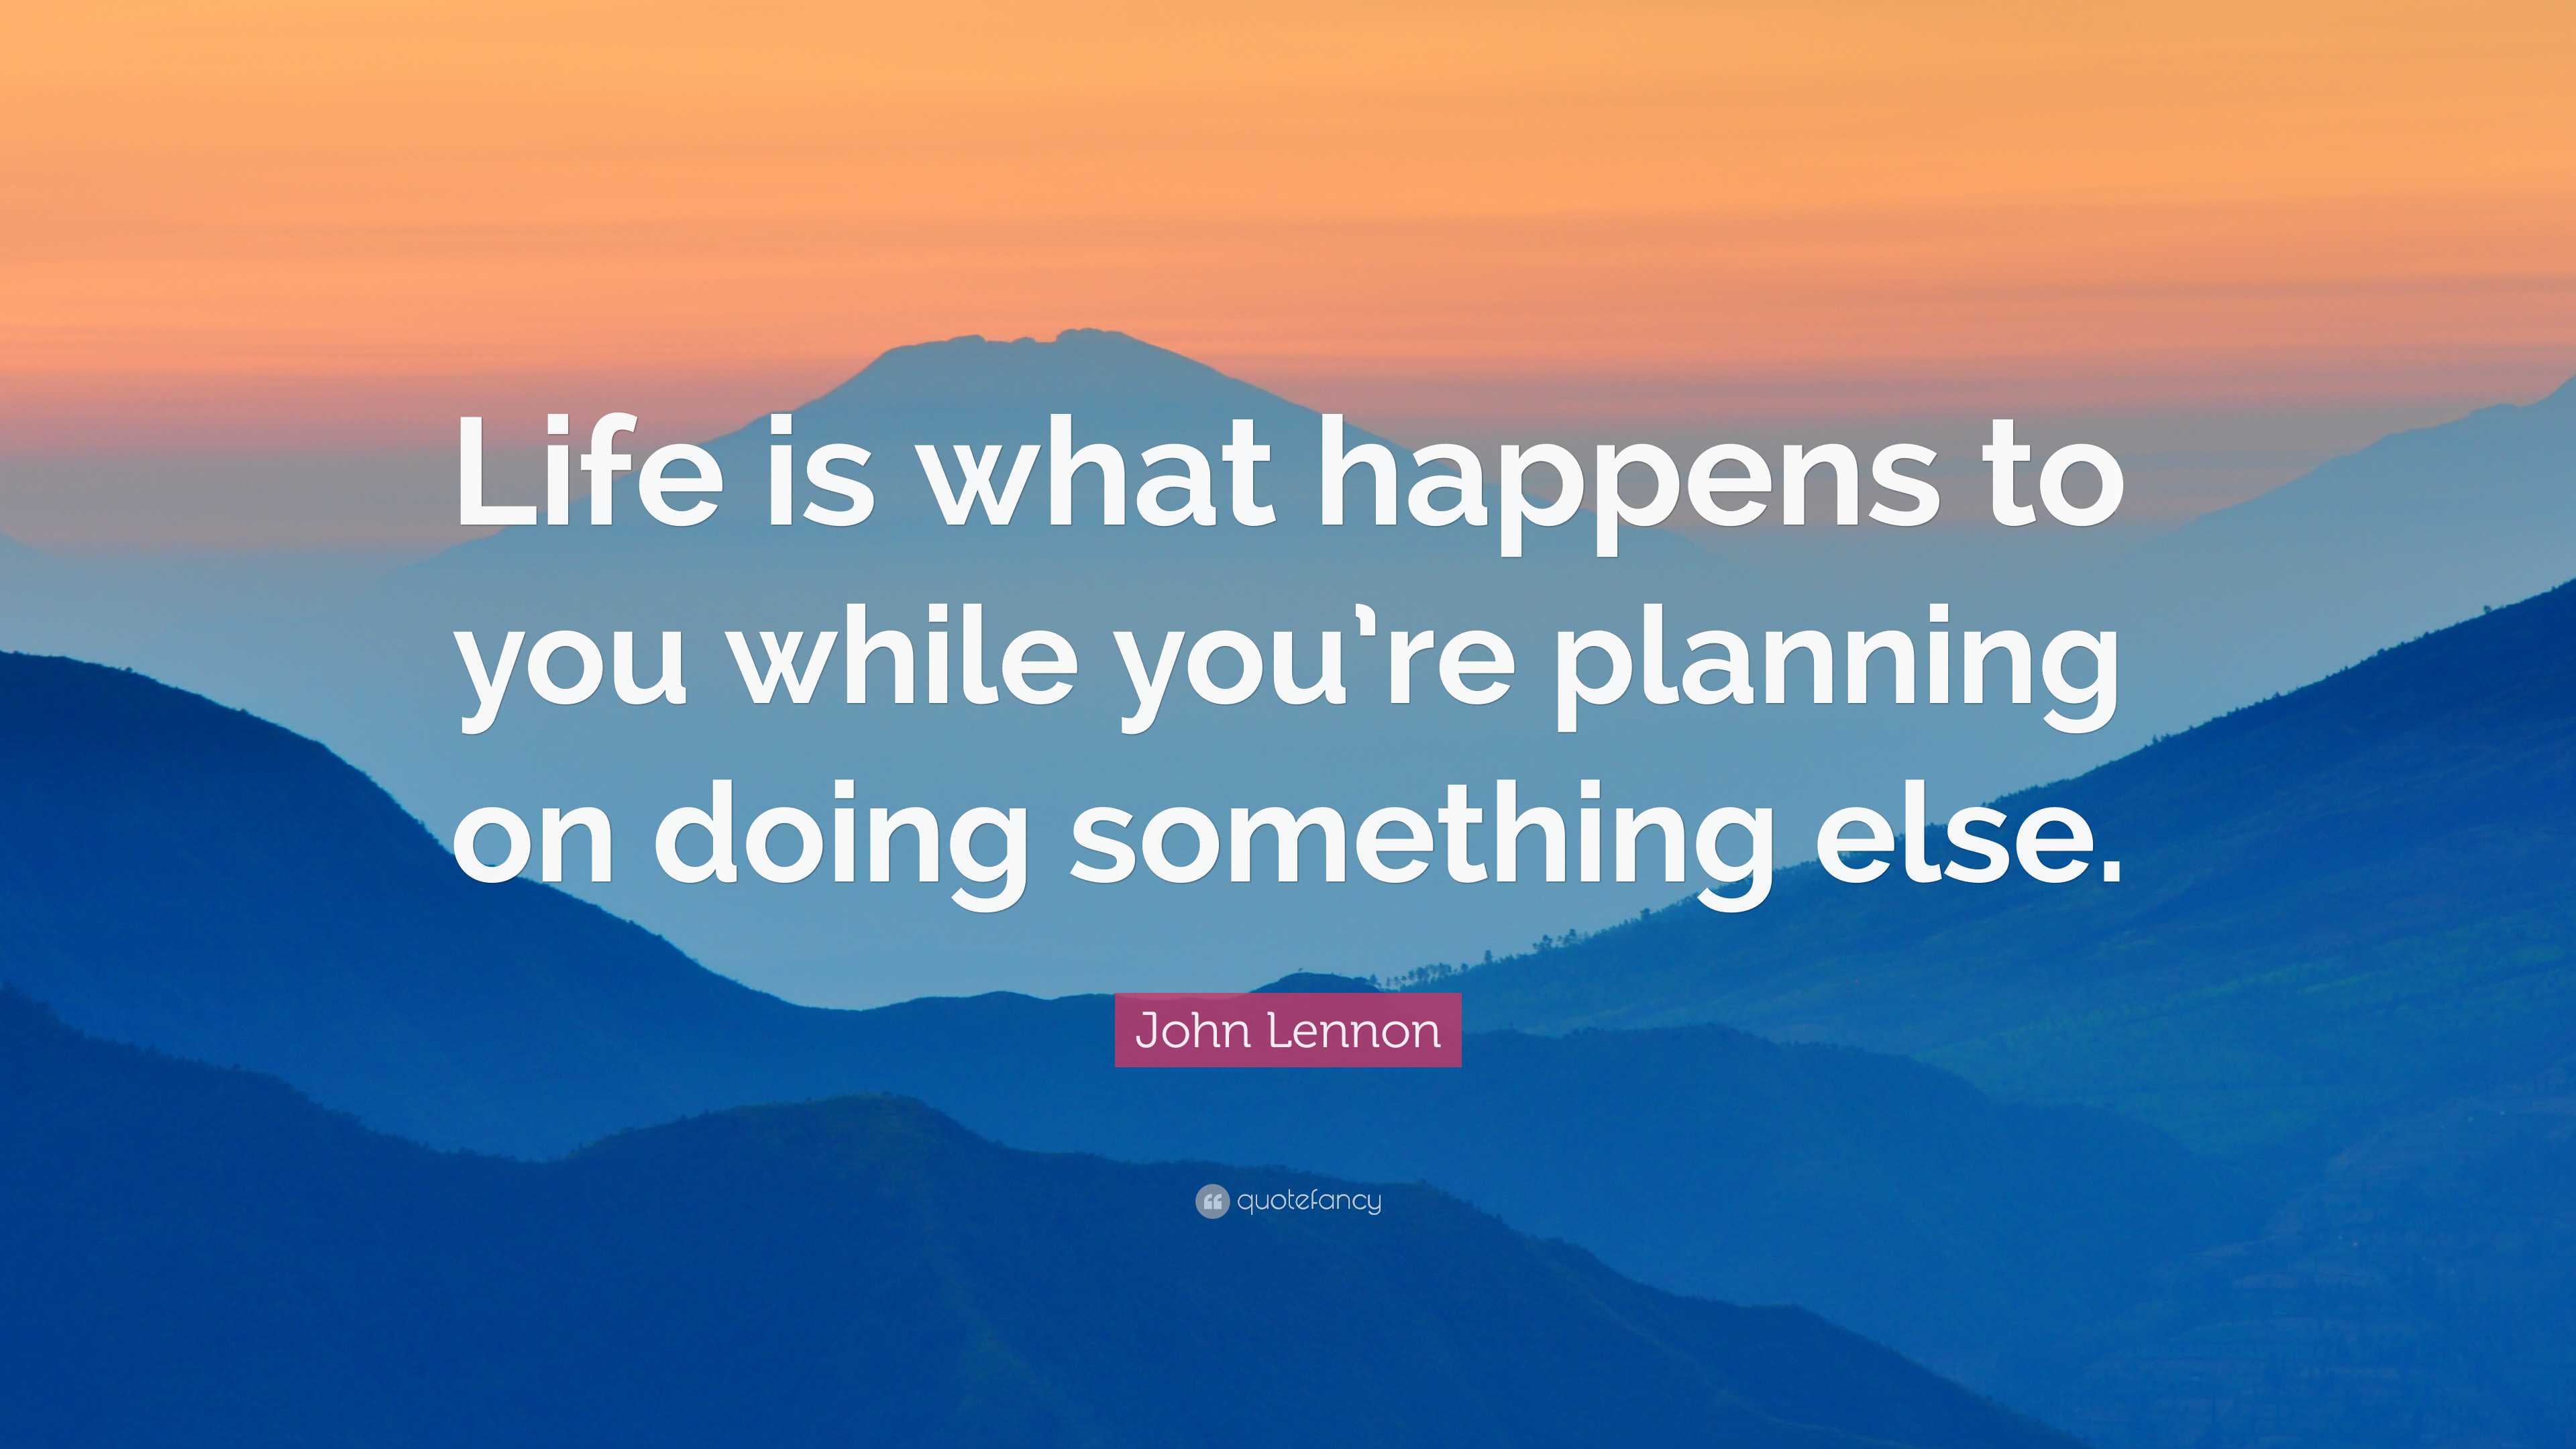 John Lennon Quote: “Life is what happens to you while you’re planning ...